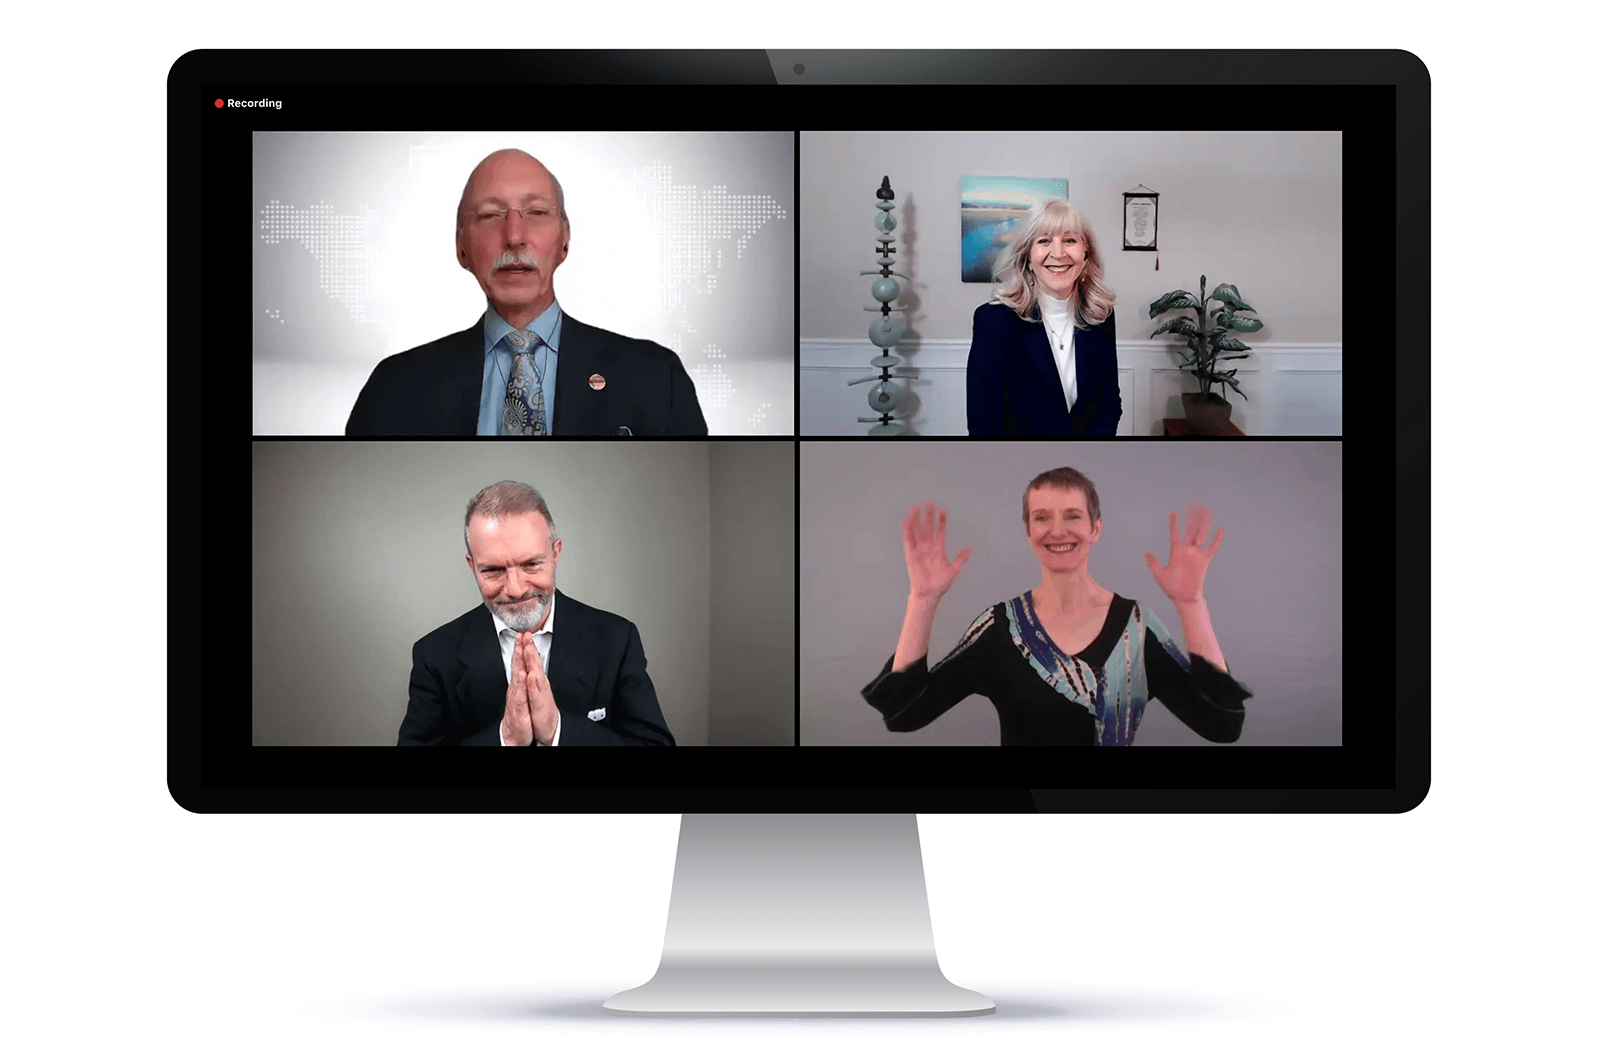 Richard E. Peck and the three winners of the 2020 Toastmasters World Championship smiling on Zoom screen